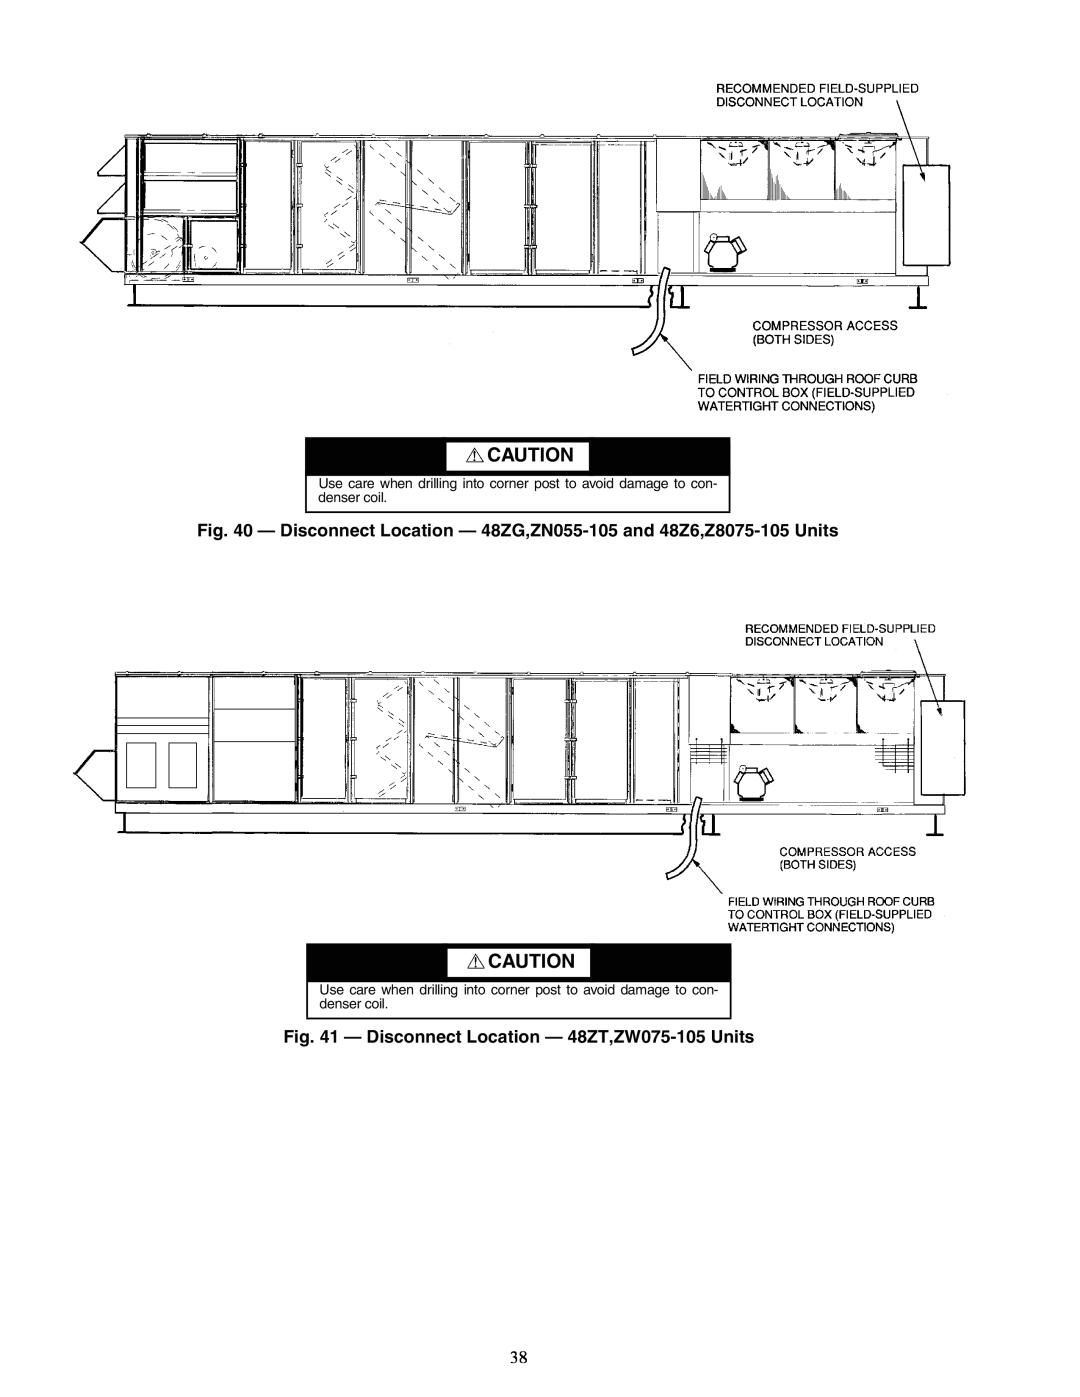 Carrier ZN030-105, ZW, 48ZT installation instructions Disconnect Location - 48ZG,ZN055-105and 48Z6,Z8075-105Units 